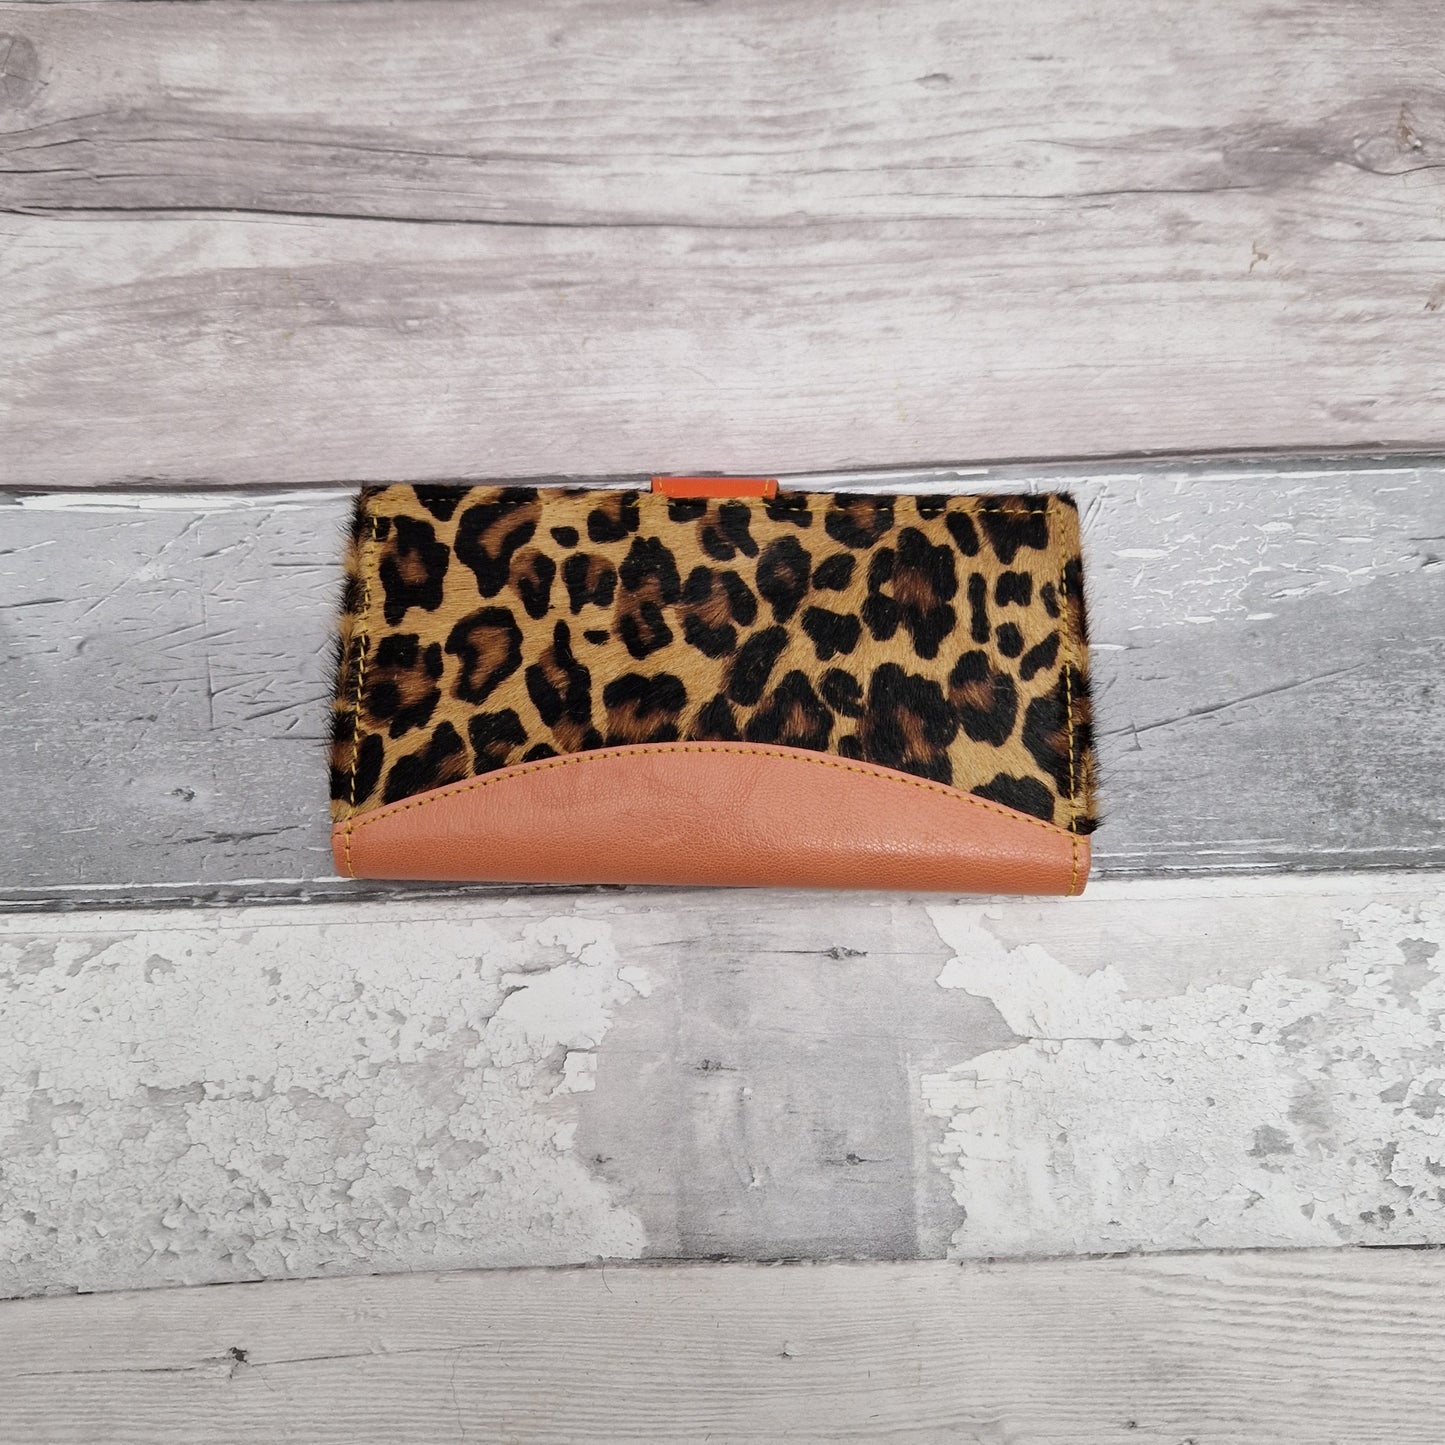 Purse made from leather off cuts featuring textured panels in a leopard print.